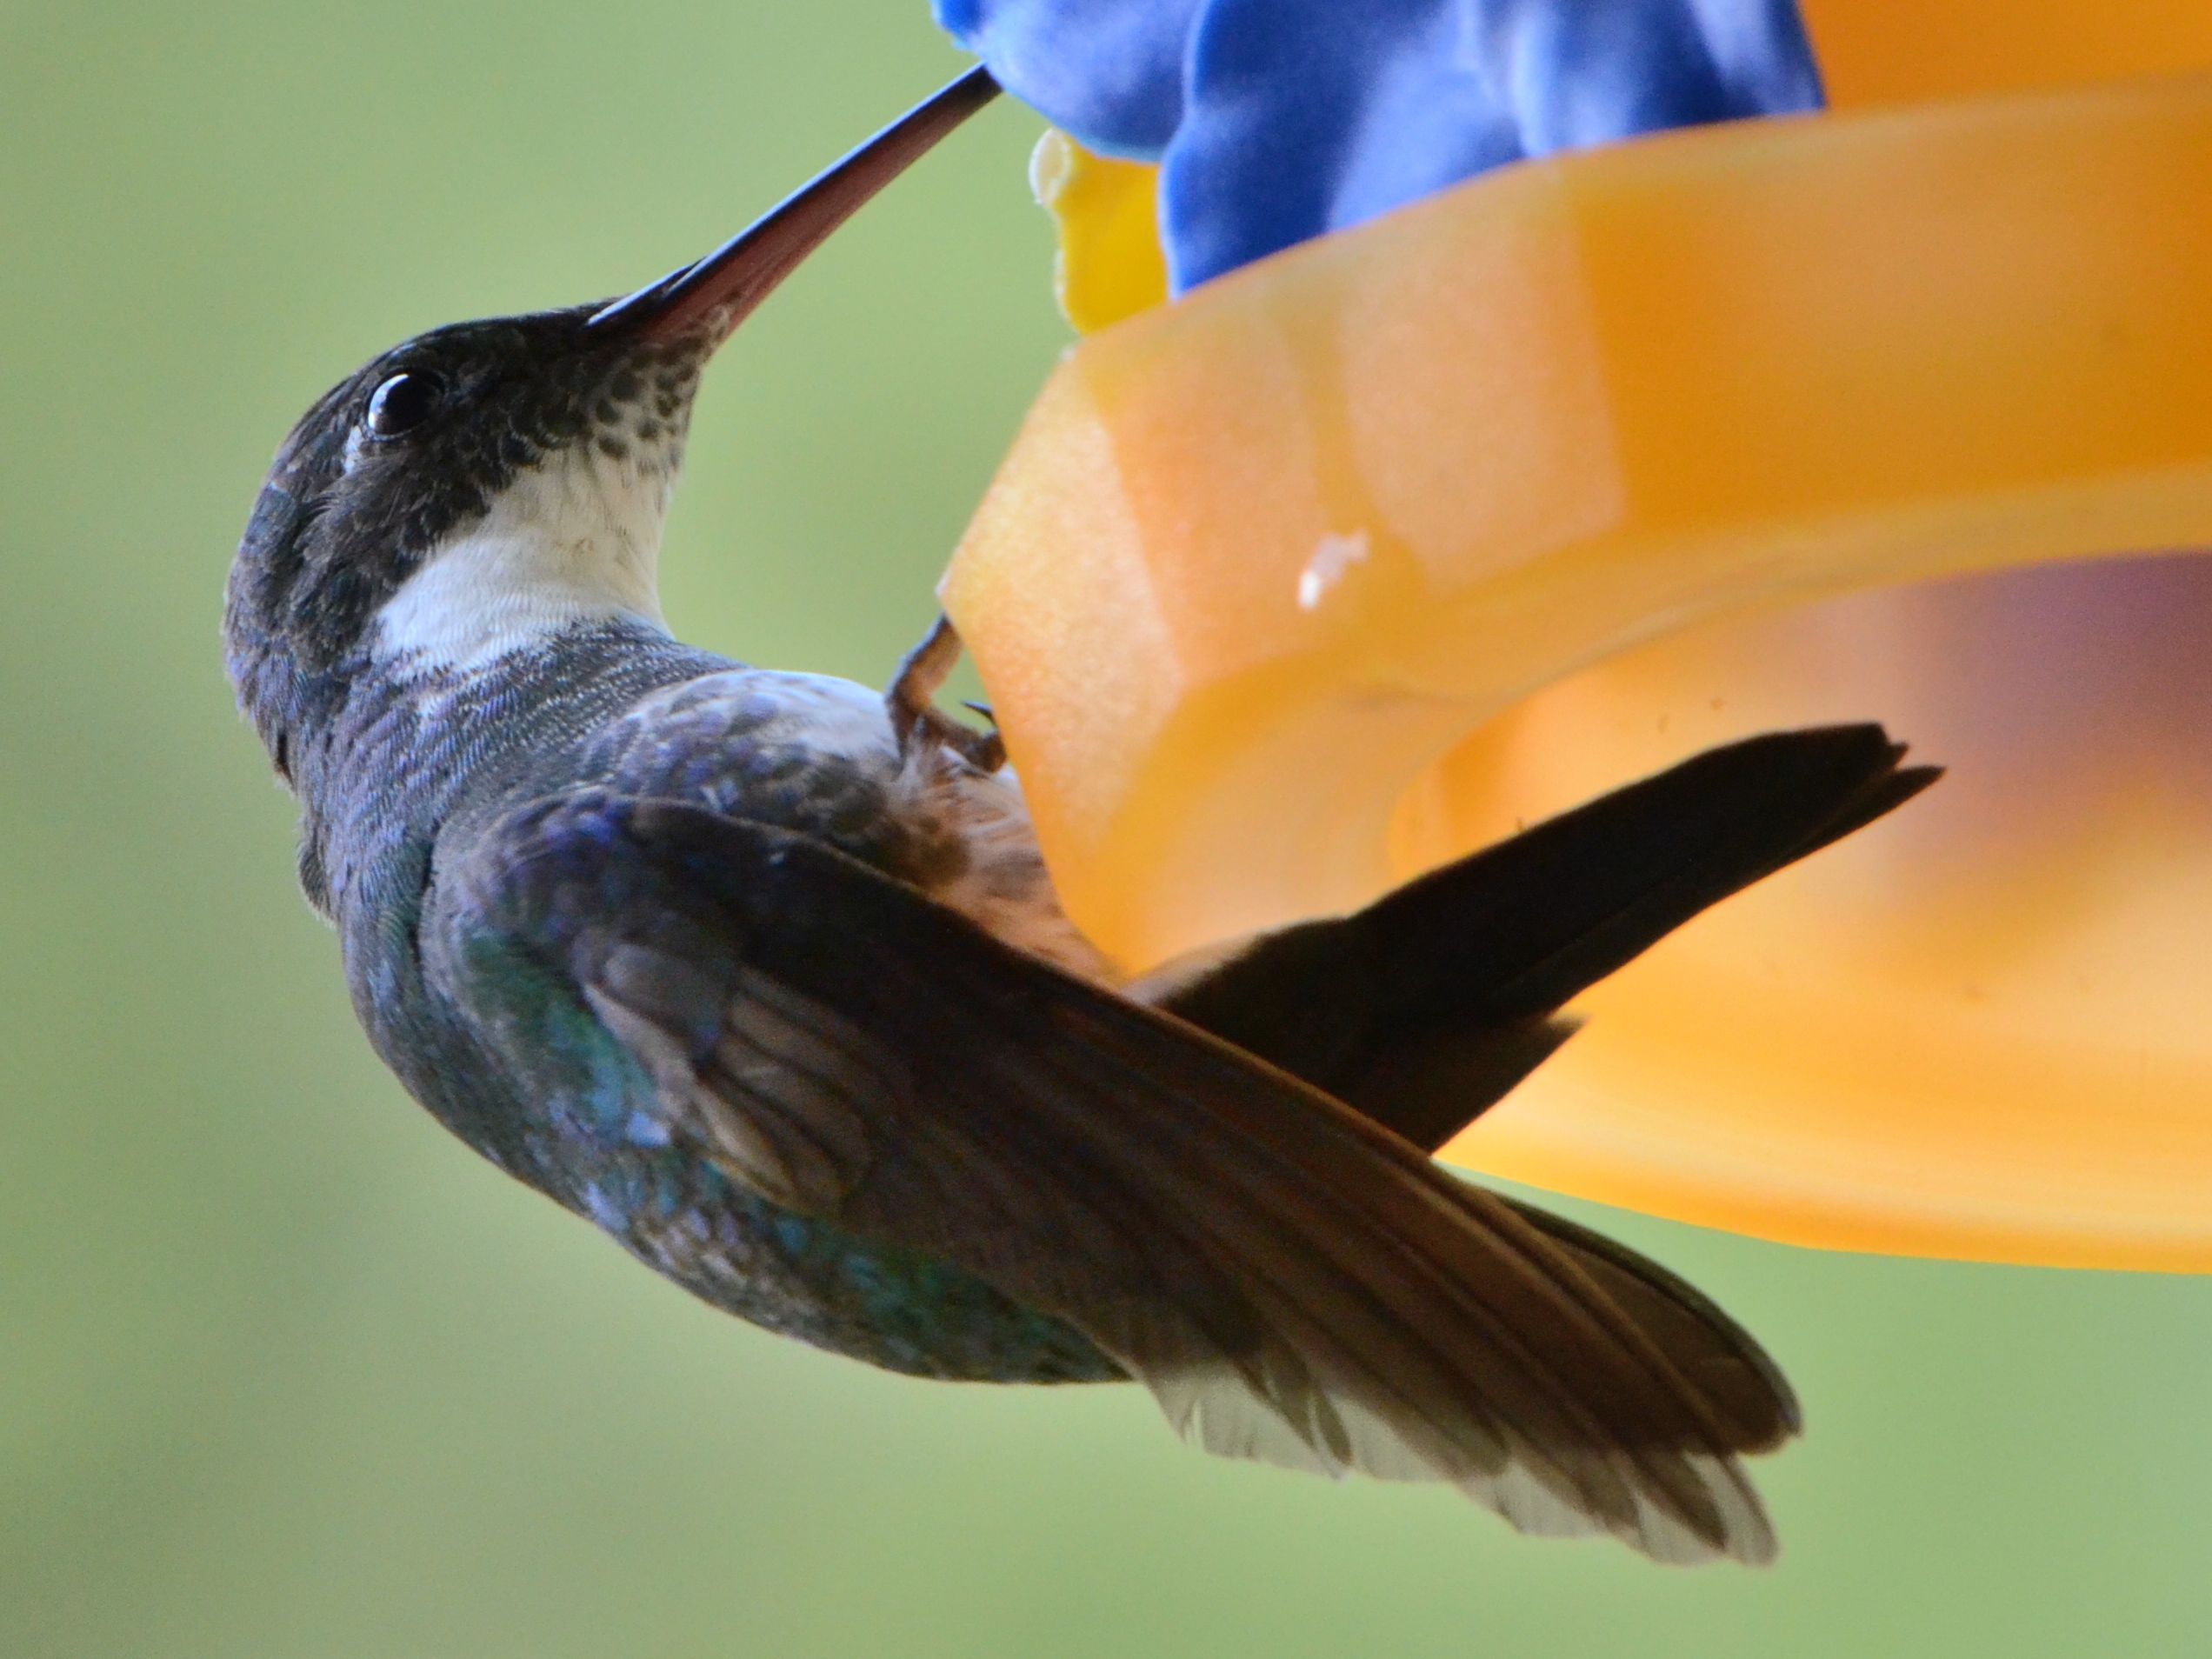 Click picture to see more White-throated Hummingbirds.